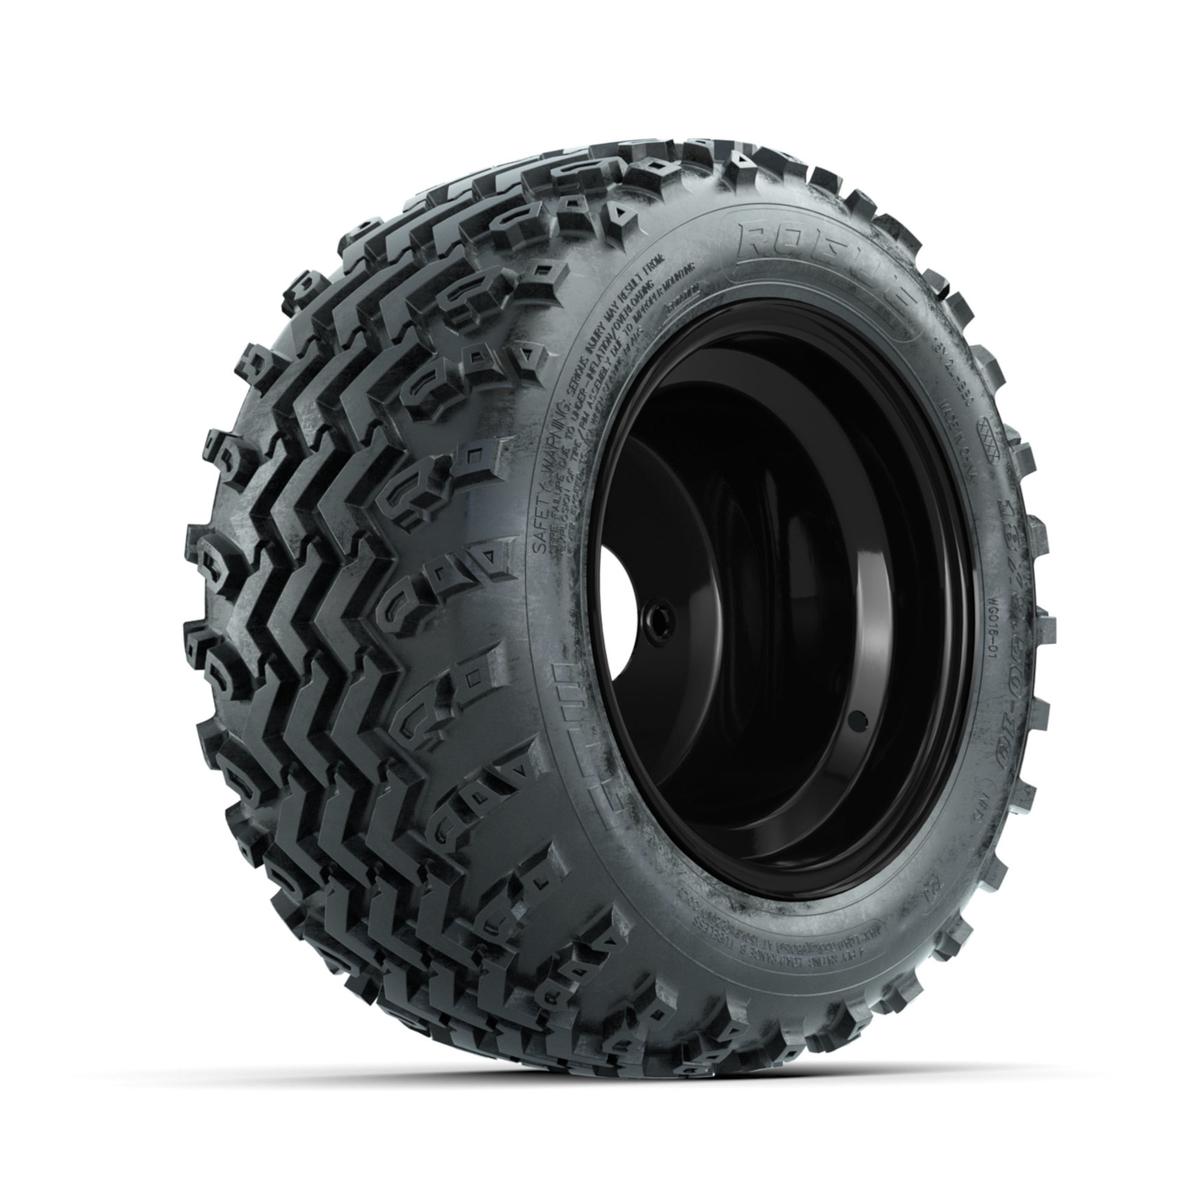 GTW Steel Matte Black 3:5 Offset 10 in Wheels with 18x9.50-10 Rogue All Terrain Tires – Full Set